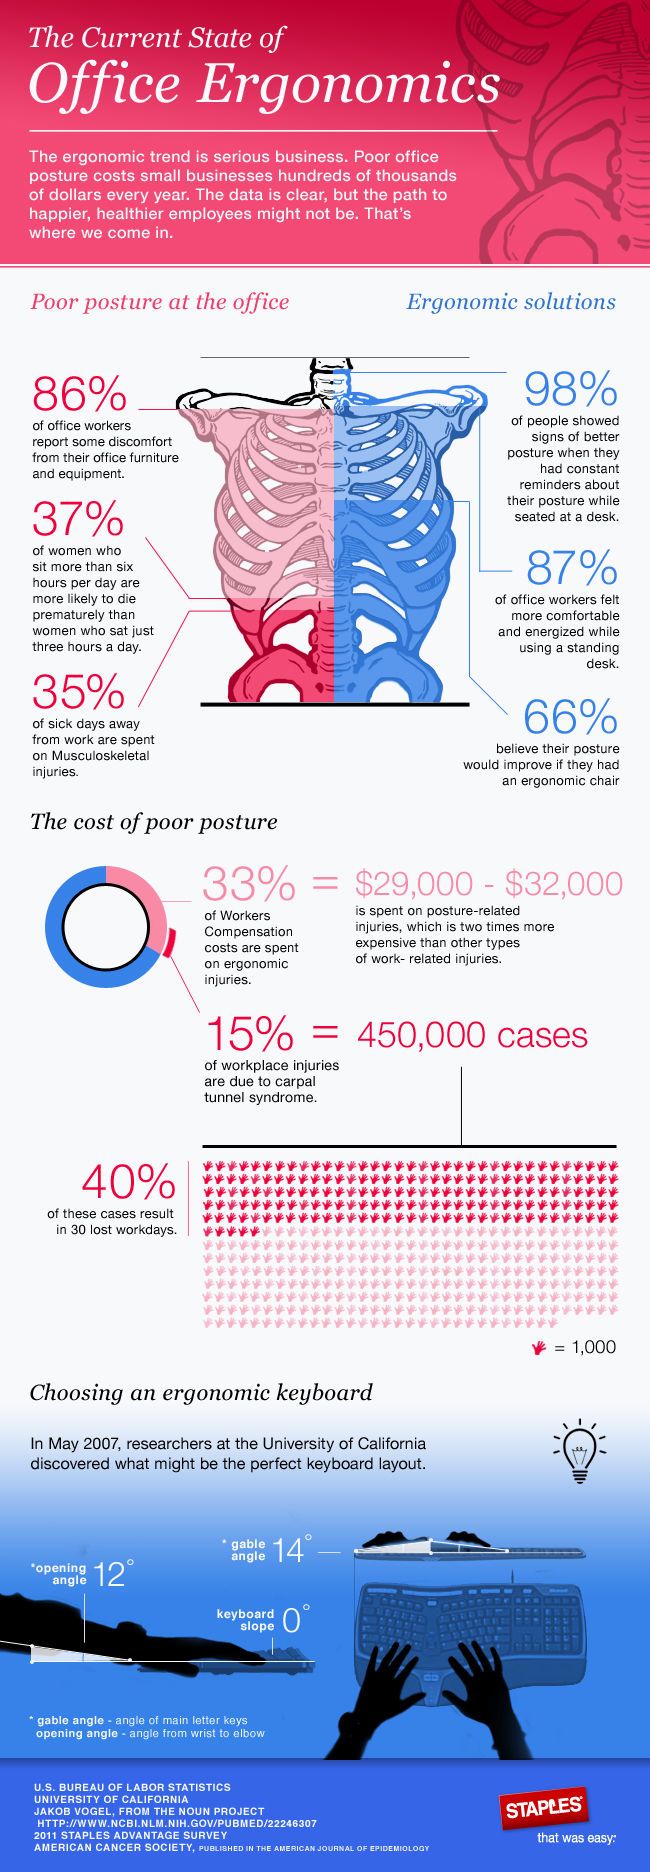 The Cost of Poor Posture